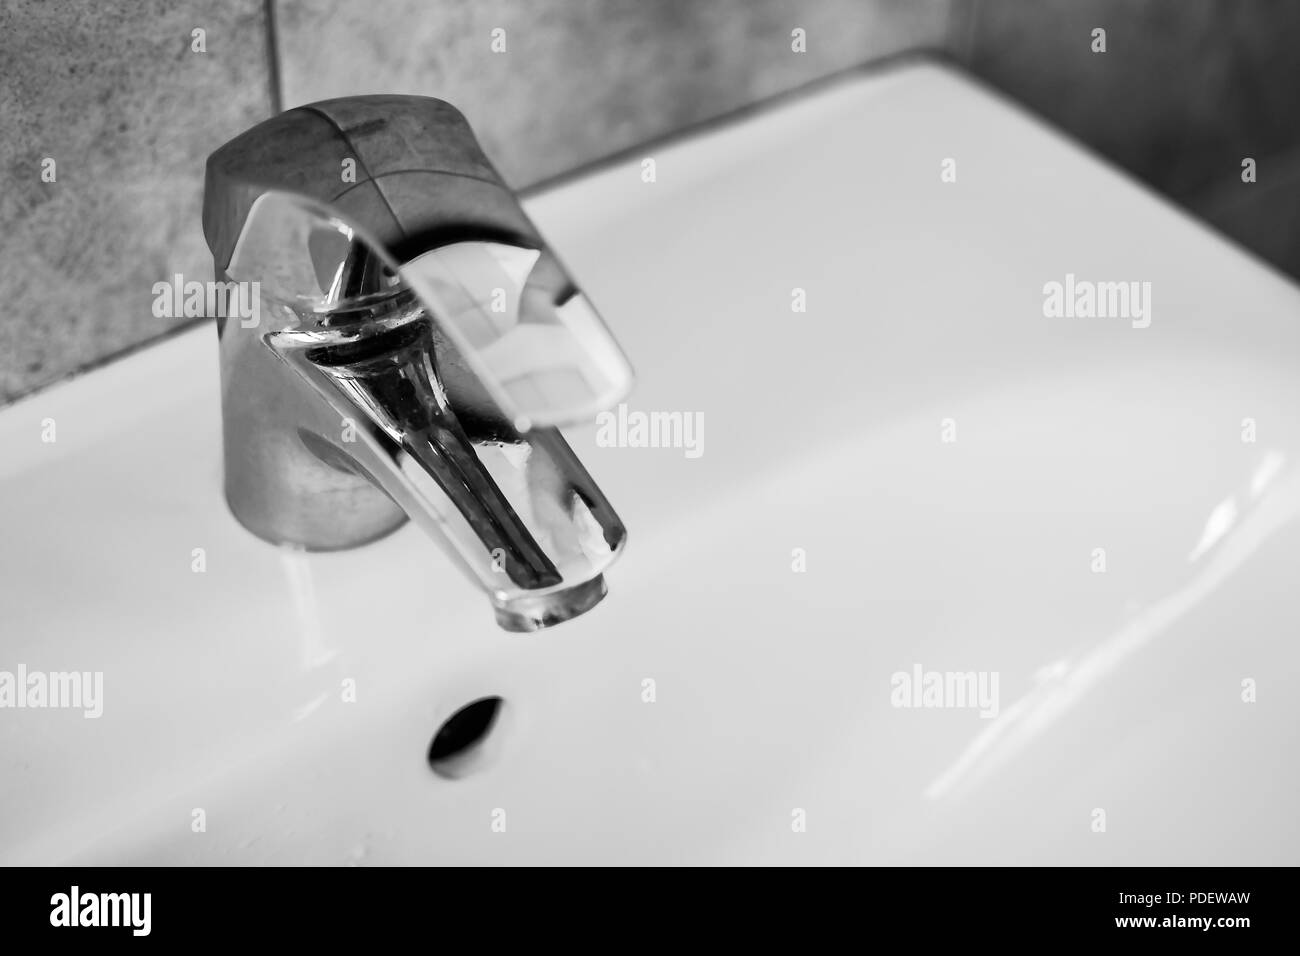 water faucet in the bathroom Stock Photo